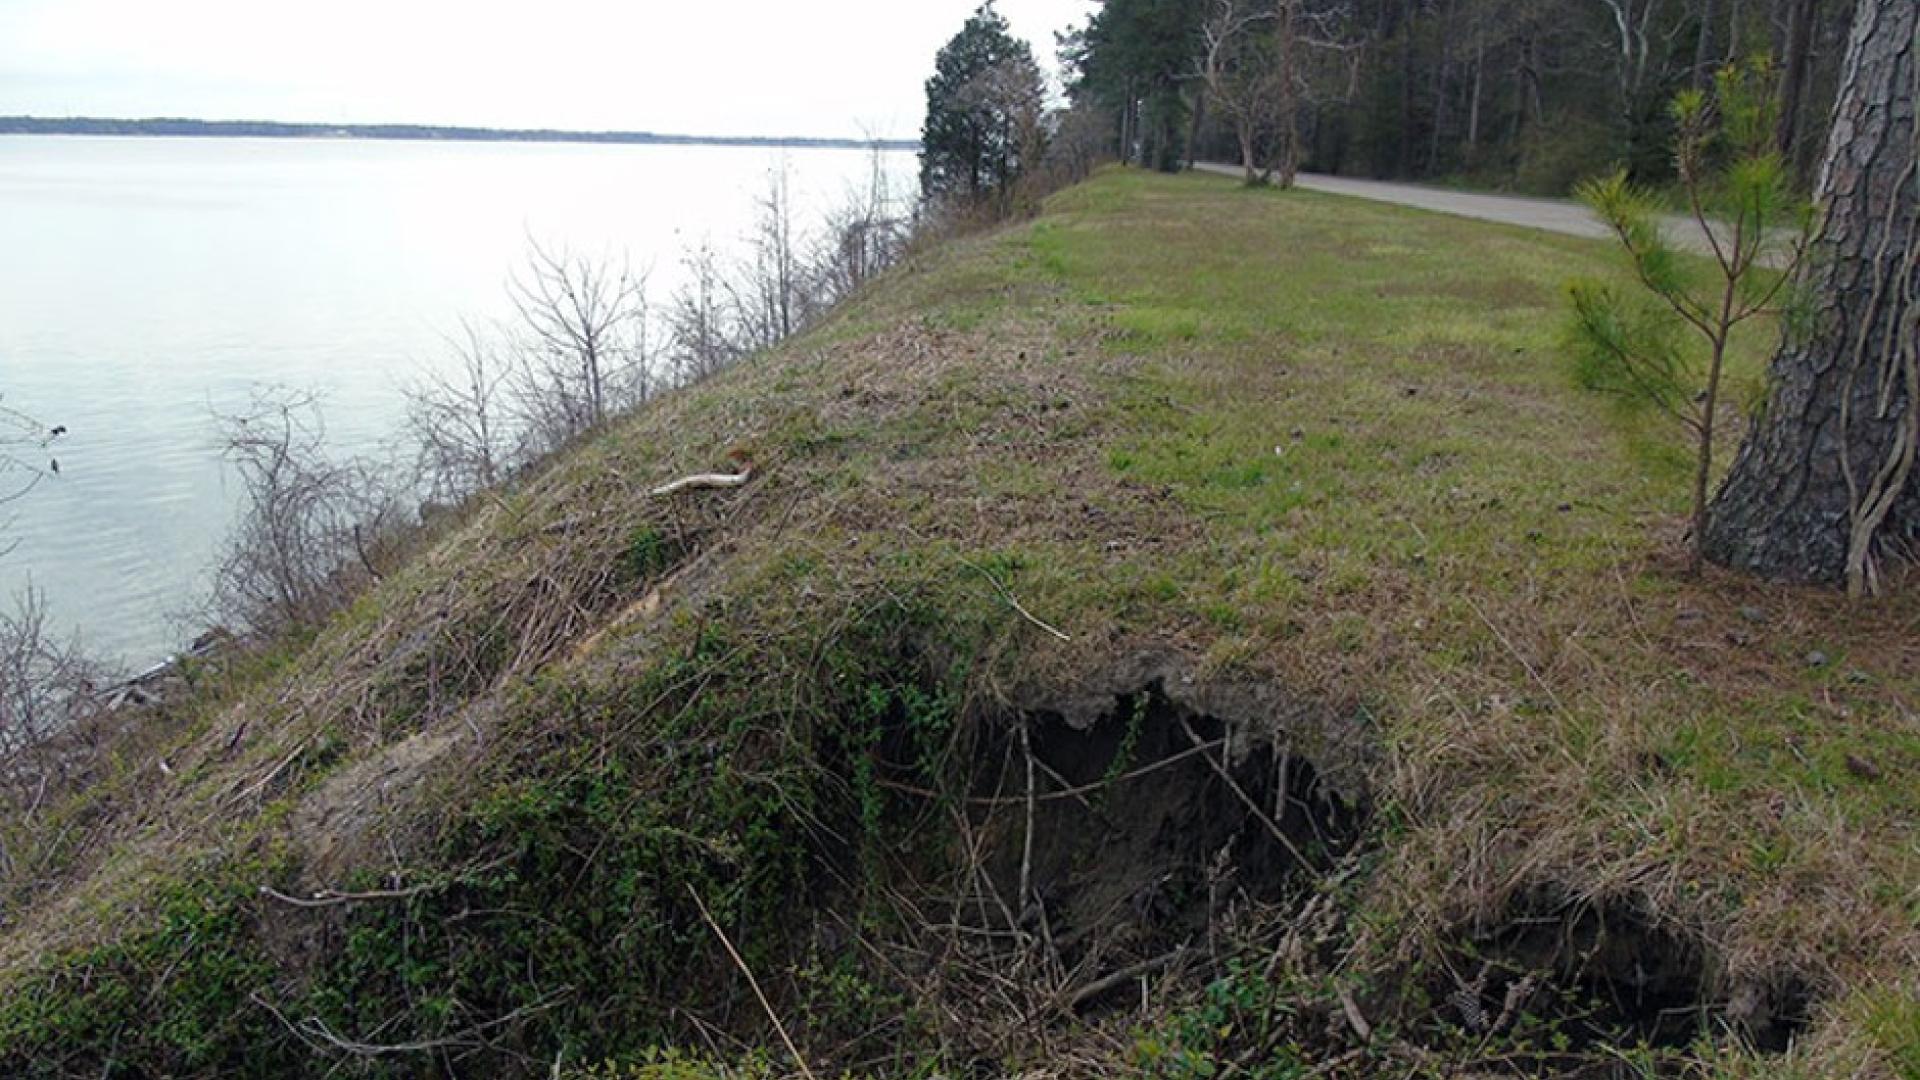 Shoreline erosion of grassy hillside along a paved road and a waterway 